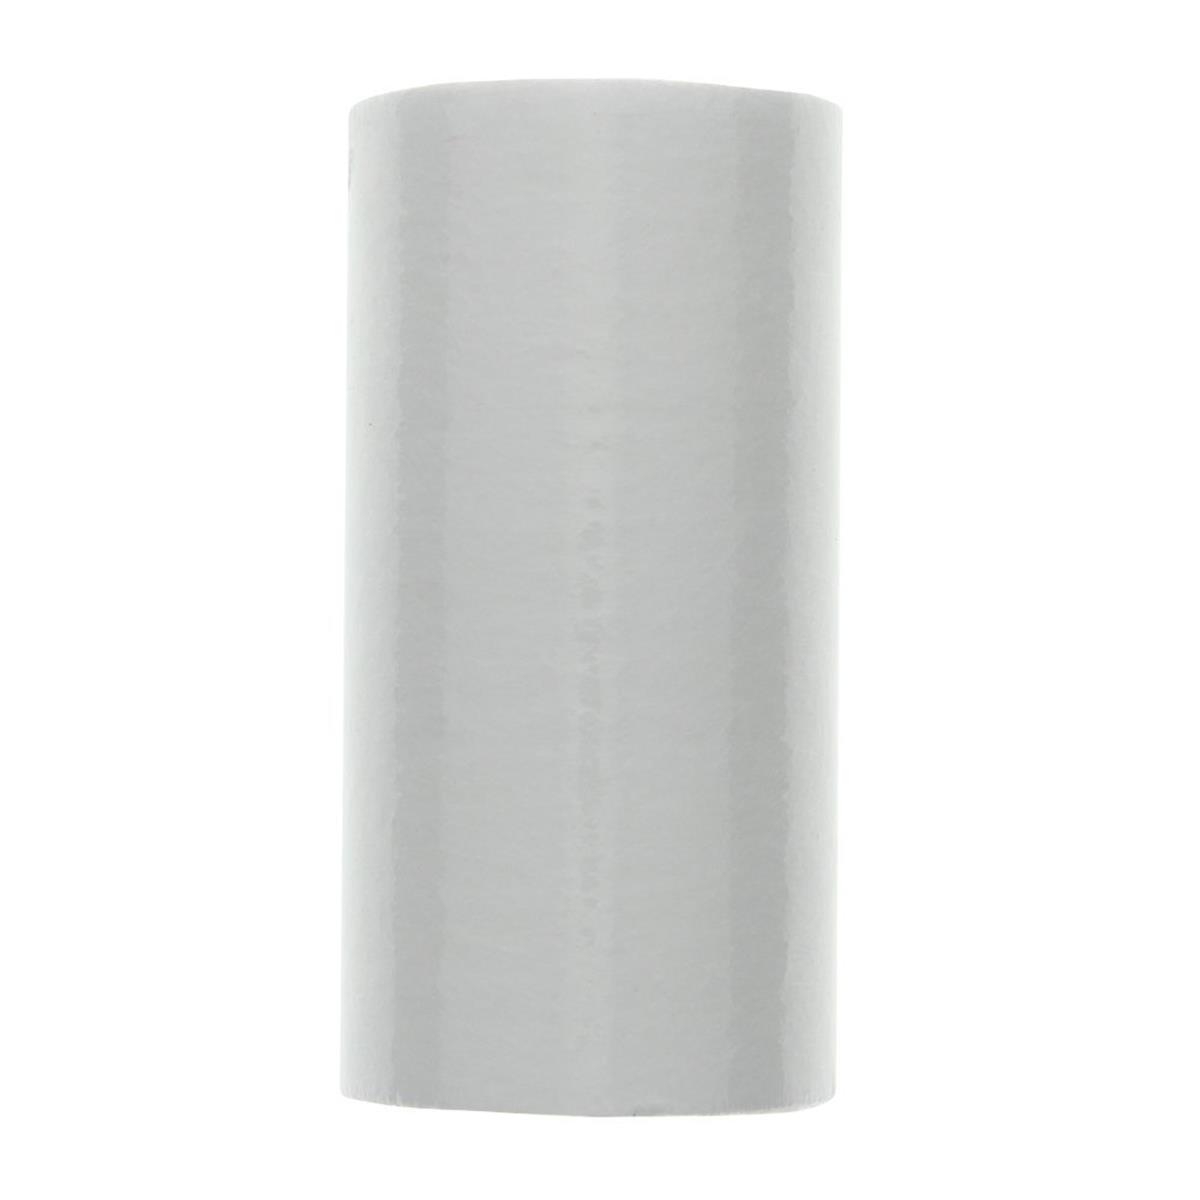 Nsf Sediment Filter 2.5 In. Od X 4.87 In. Length, 1 Micron